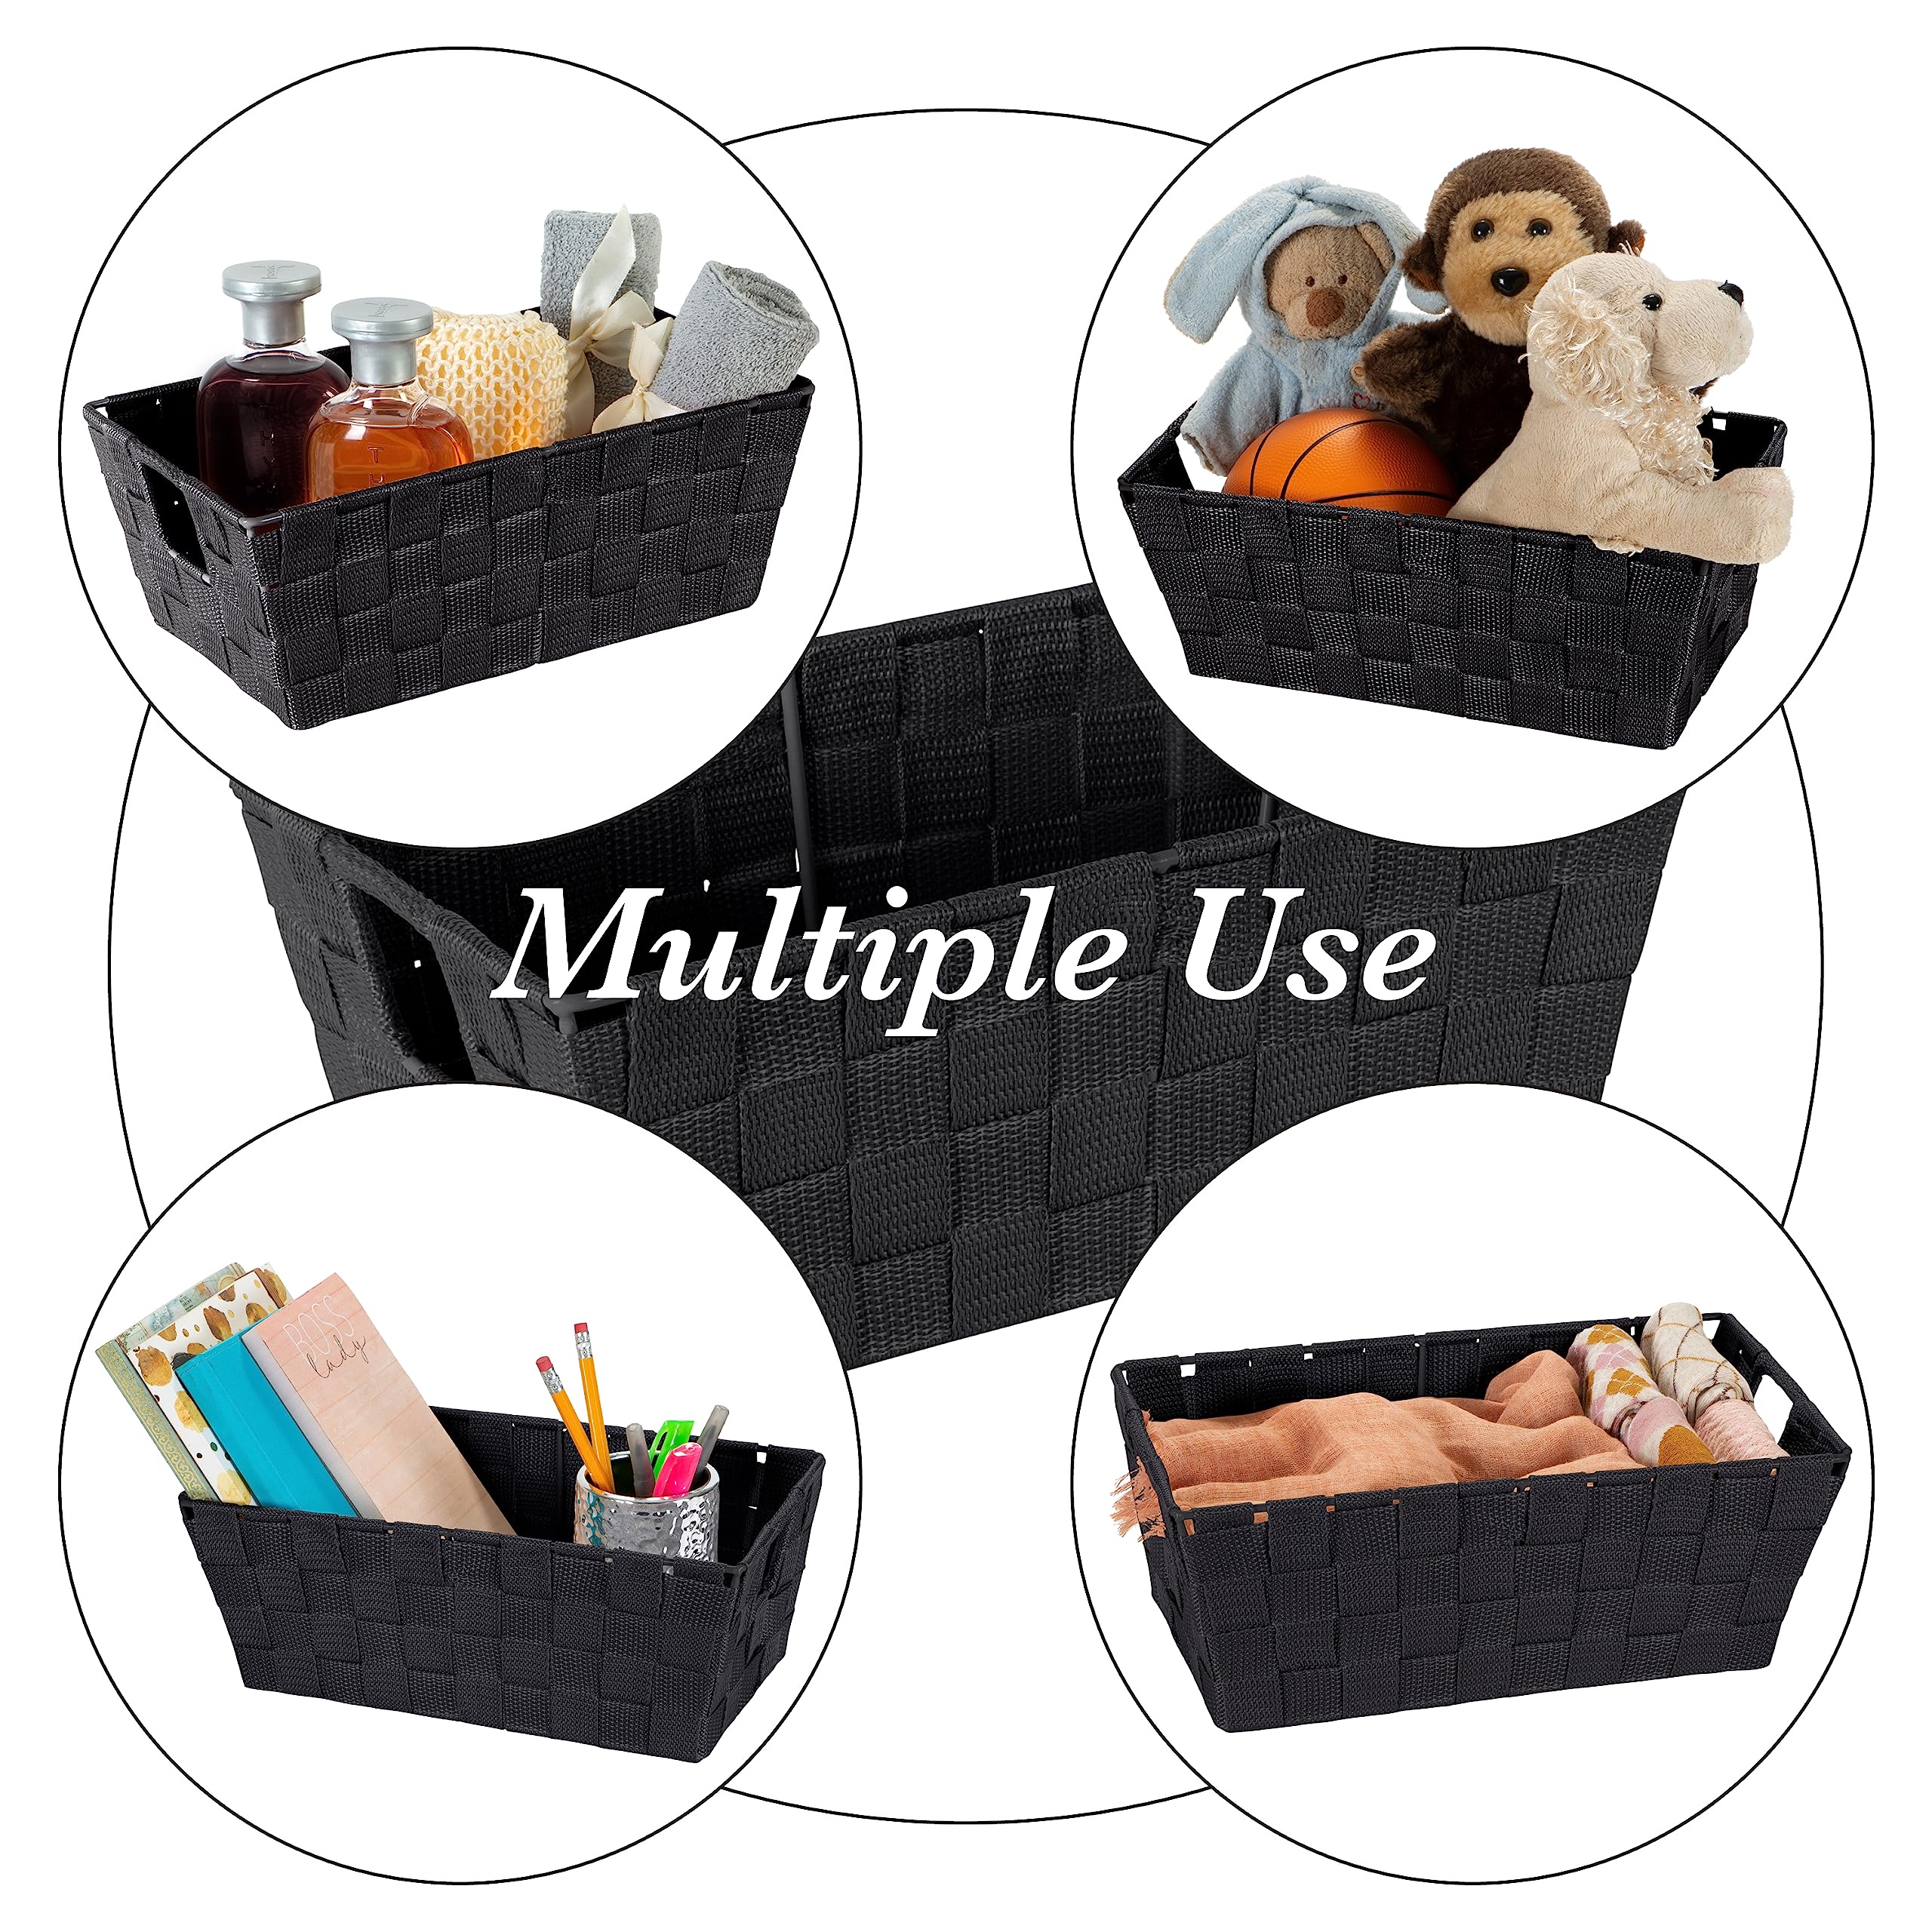 Simplify Small Shelf Woven Strap Tote | Decorative Storage Basket | Built in Handles | Organization | Closet | Bedroom | Bathroom | Nursery | Accessories | Toys | Gifts | 1 Pack | Black